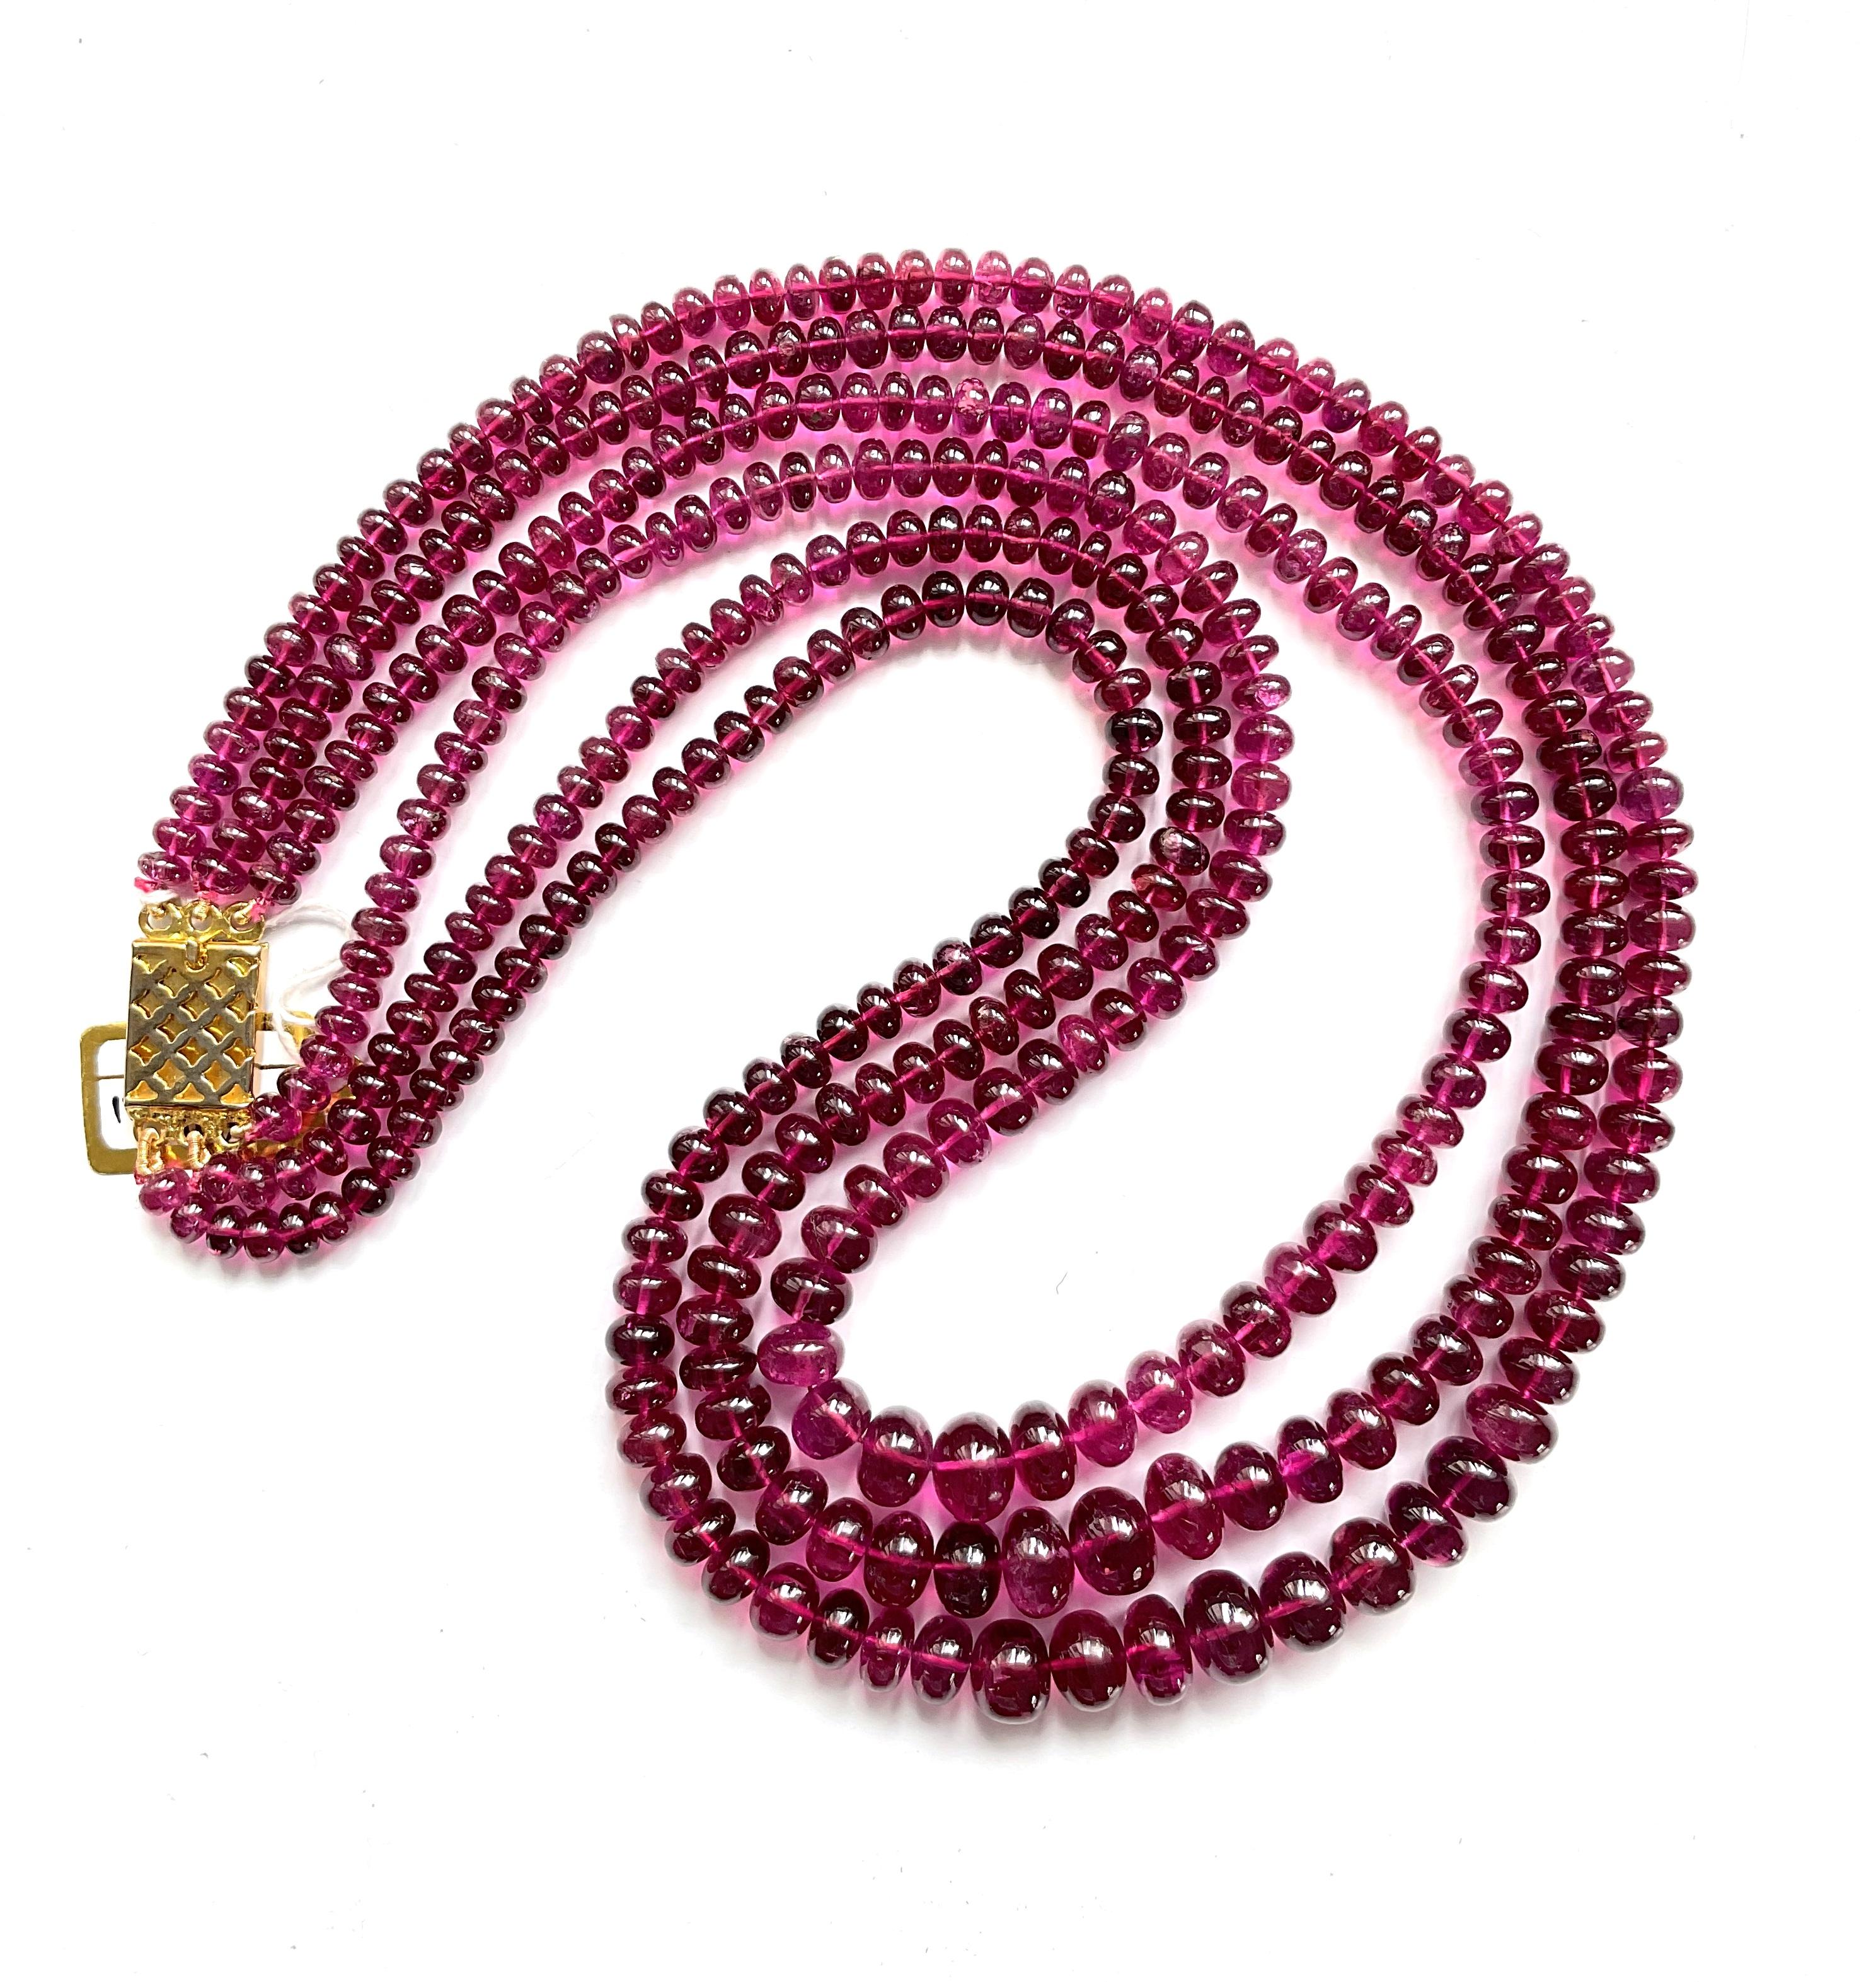 510.00 Carats Top Quality Rubellite Tourmaline Plain Beads Natural Gemstone For Sale 1